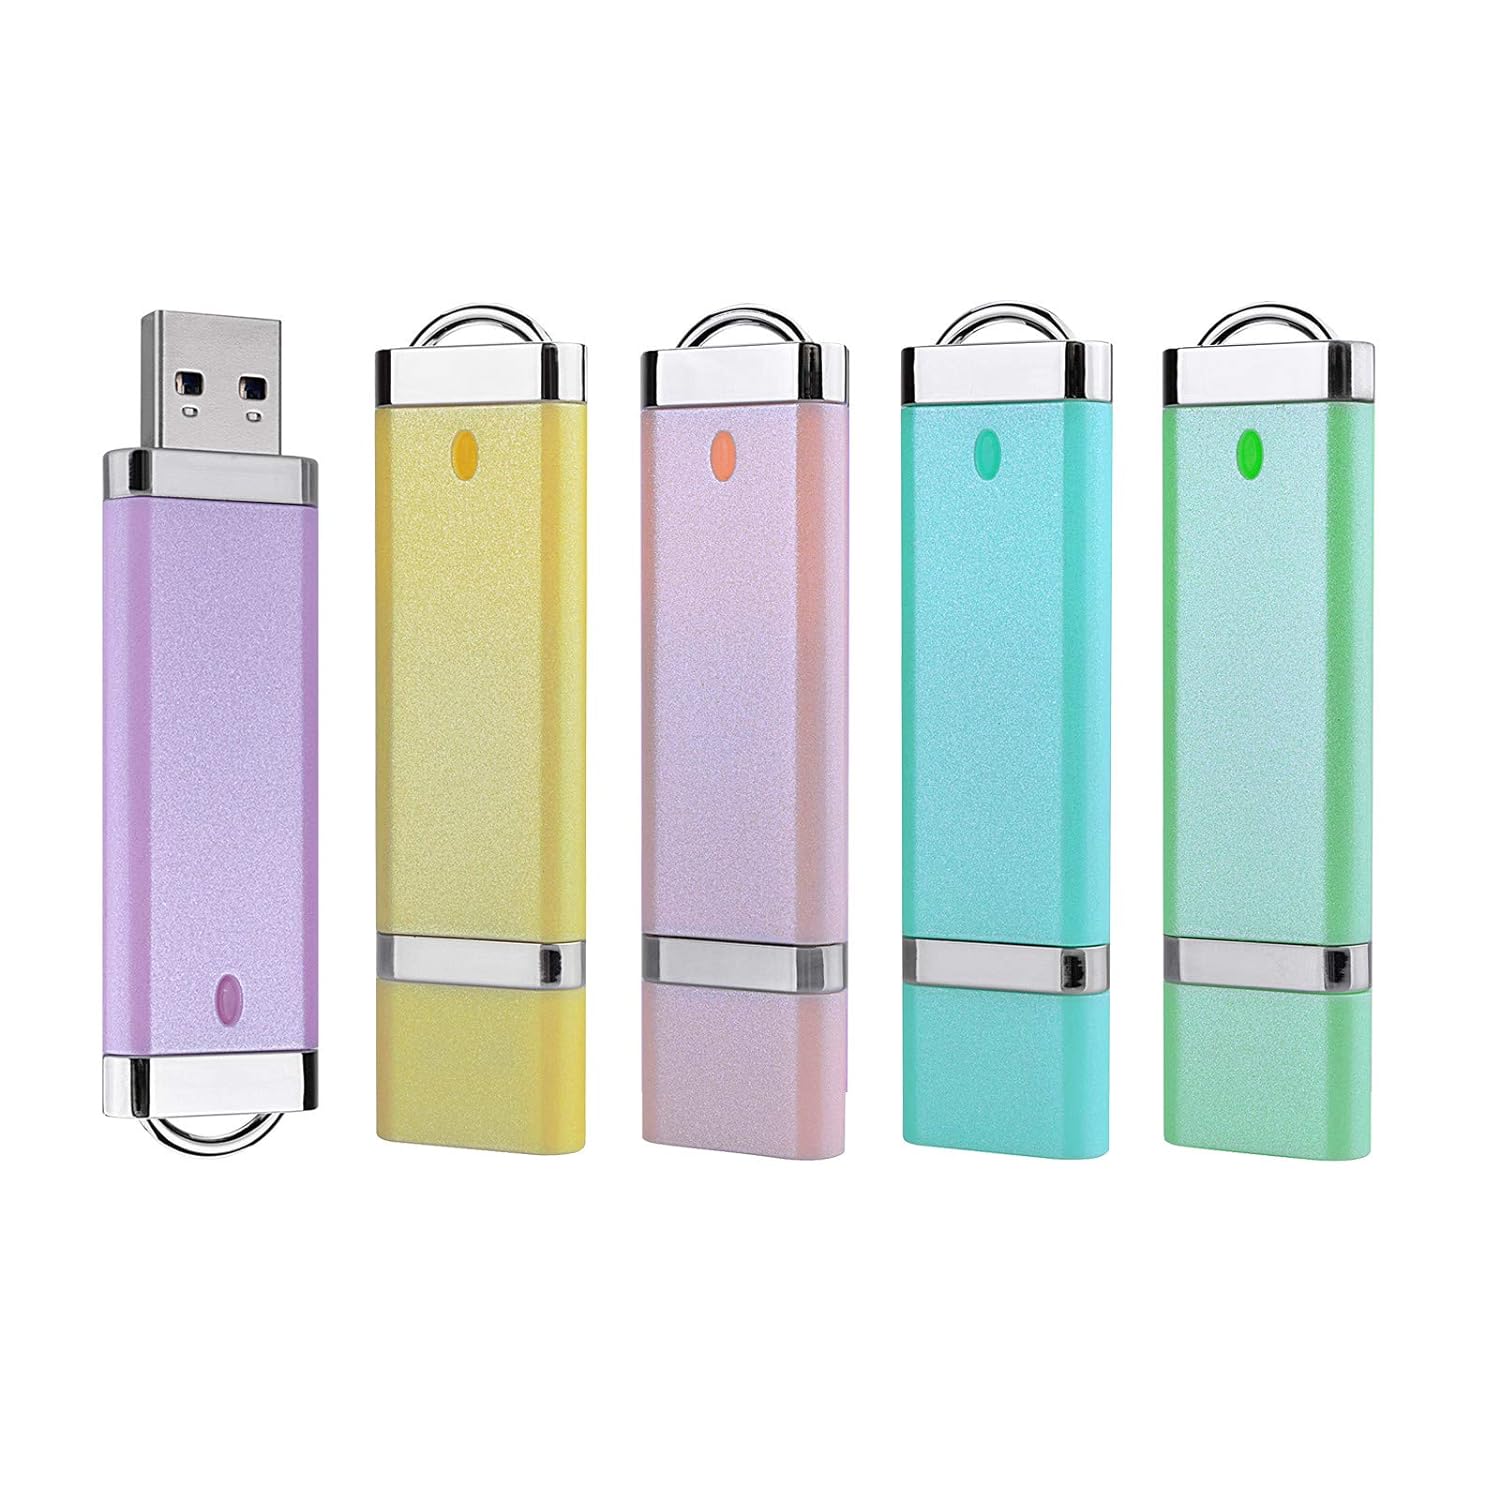 Great Choice Products 2Gb 2G Usb Flash Drive 5 Pack Usb 2.0 Memory Stick Thumb Drives 2Gb (5 Mixed Colors: Blue Green Yellow Pink Purple)